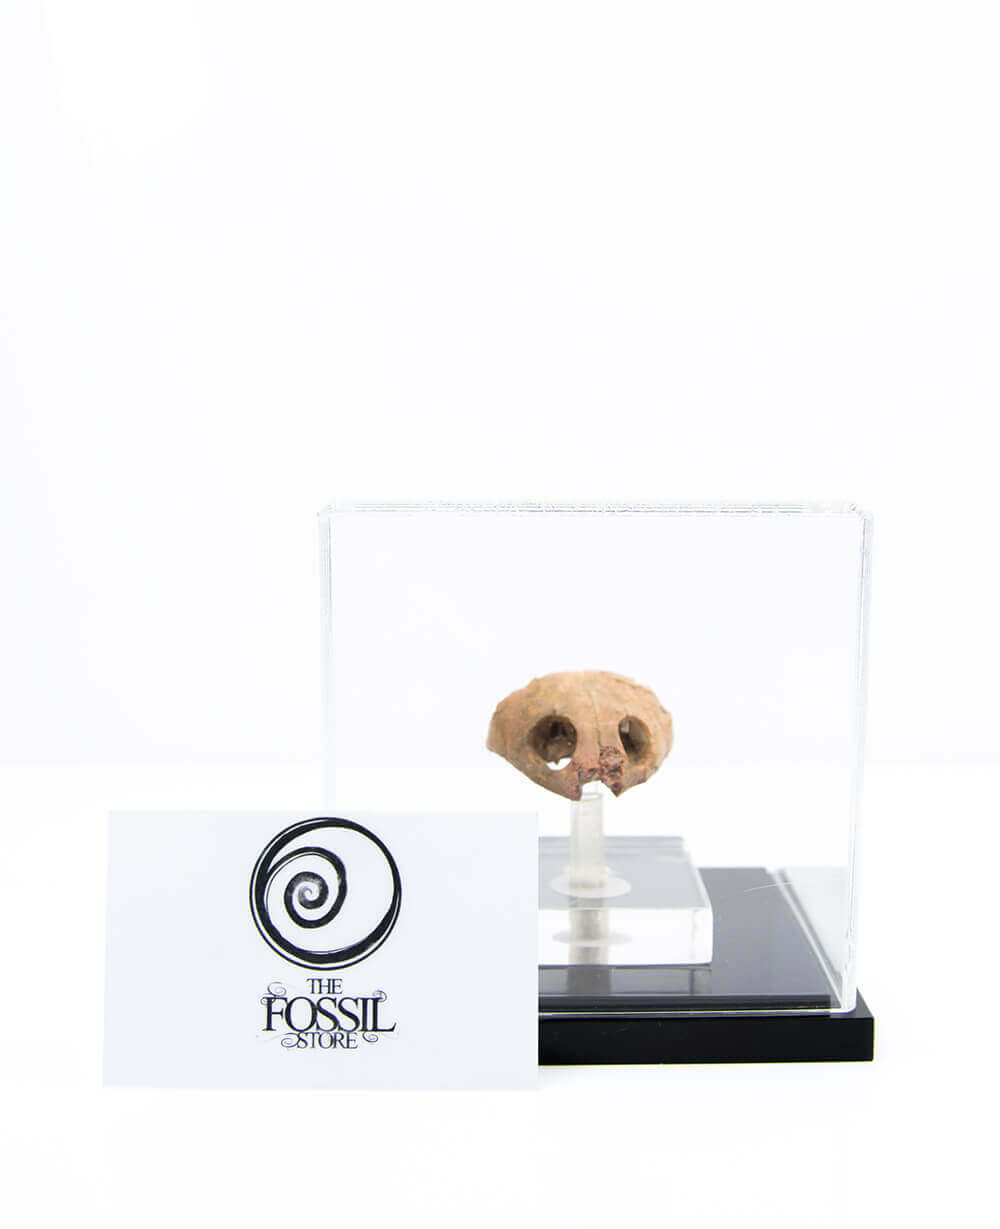 A rare side-neck Bothremydidae turtle skull fossil for sale on stainless steel pedestal now available at THE FOSSIL STORE